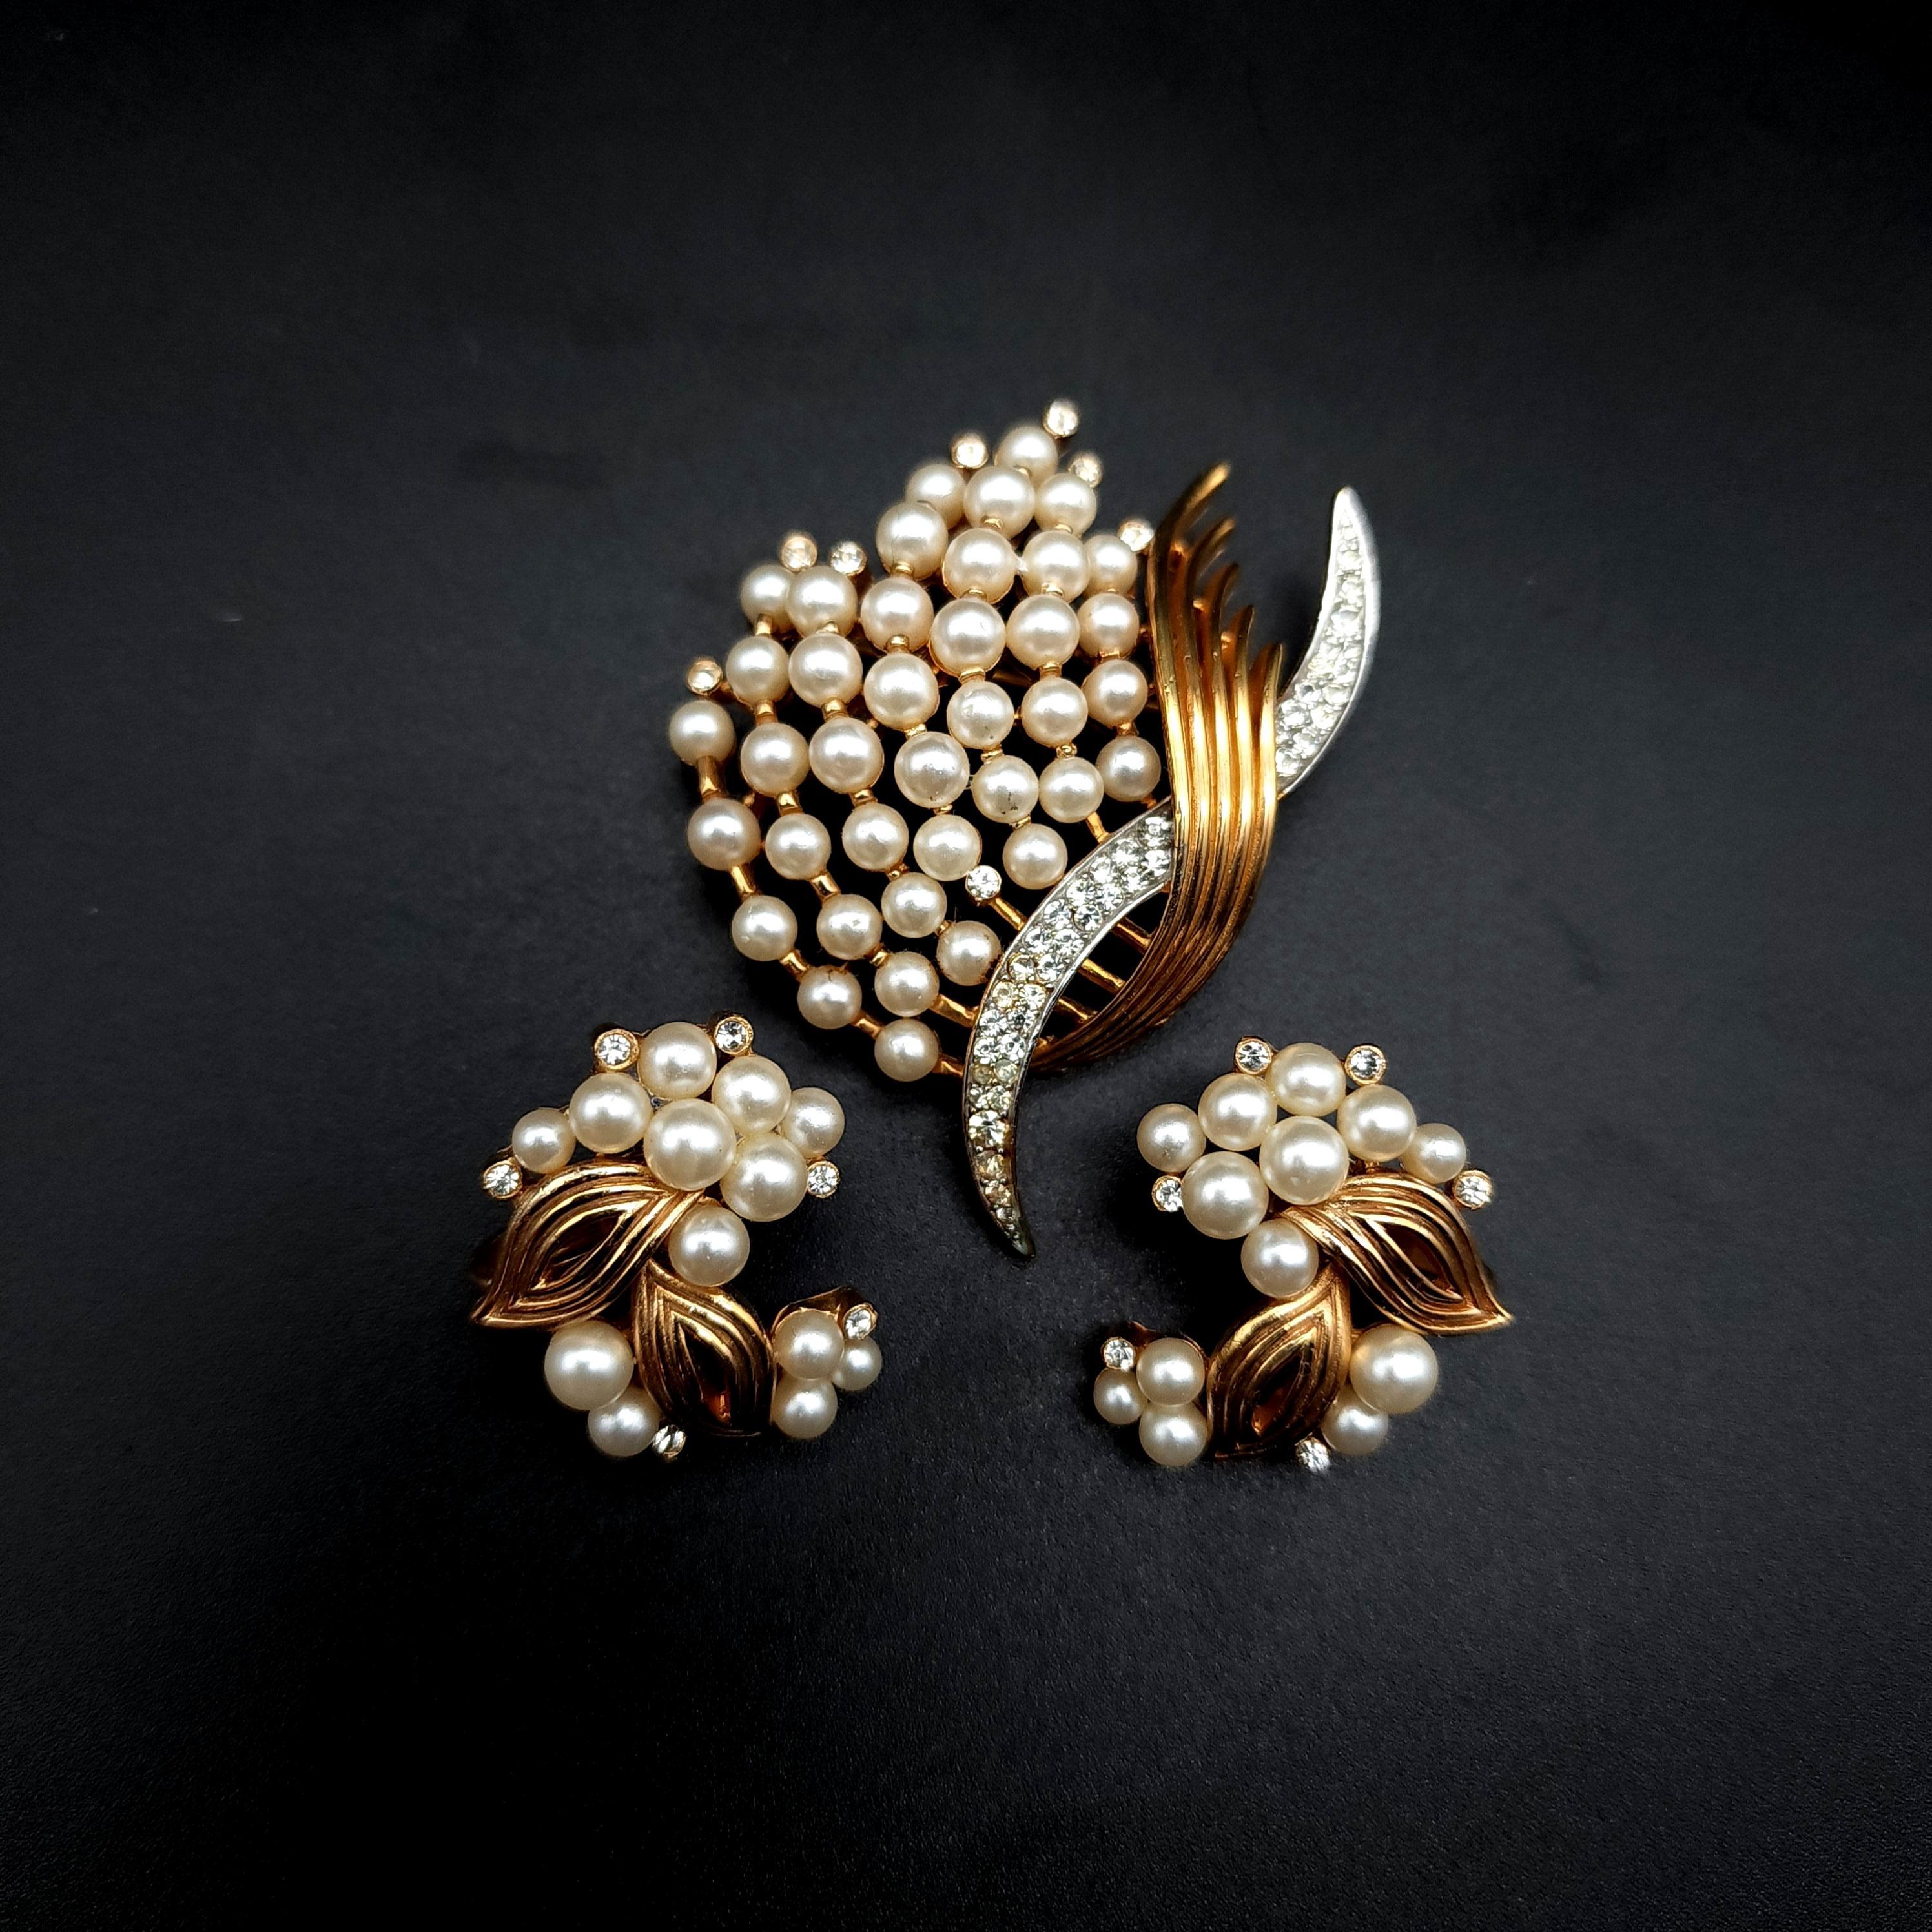 This glamorous 20th century Crown Trifari brooch and clip on earrings set.  Decorated with faux pearl & rhinestones. For a sophisticated and stylish look!

Marks / hallmarks / etc:  Crown Trifari 
Pin: 2 1/4 in
Earring: 1 in
Condition: Excellent